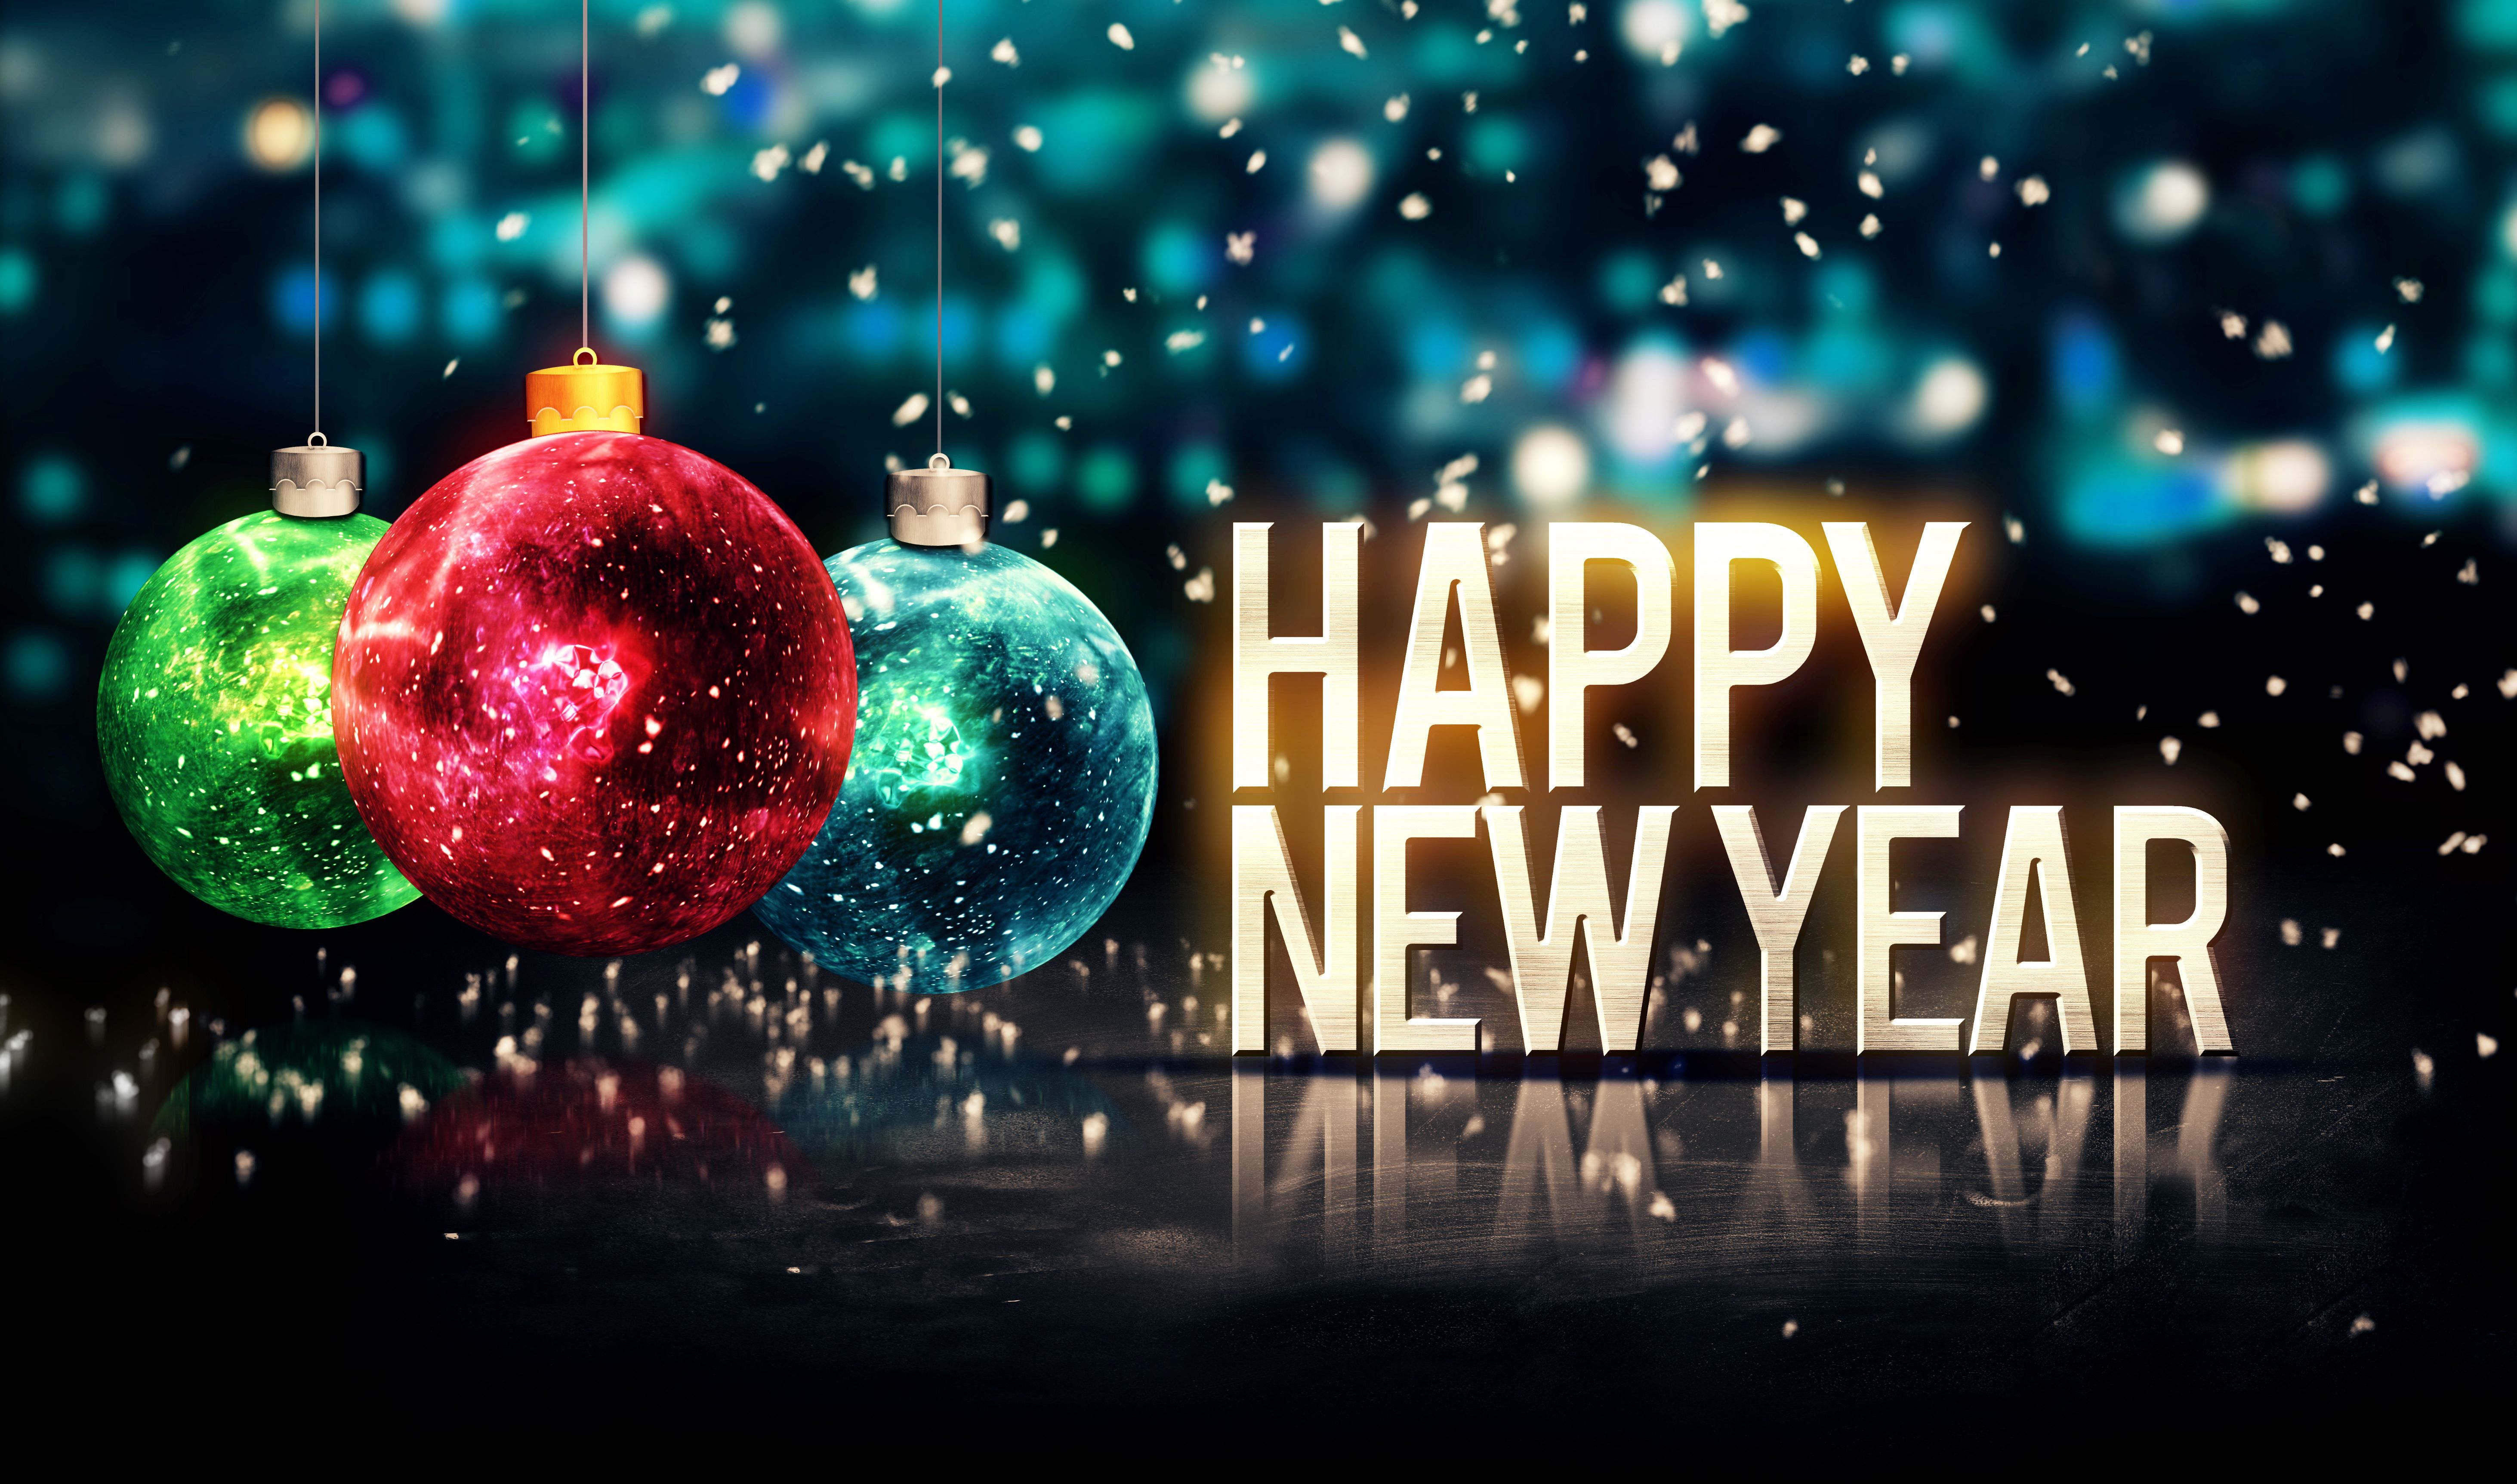 Beautiful Happy New Year Wallpaper HD. New Year Wishes